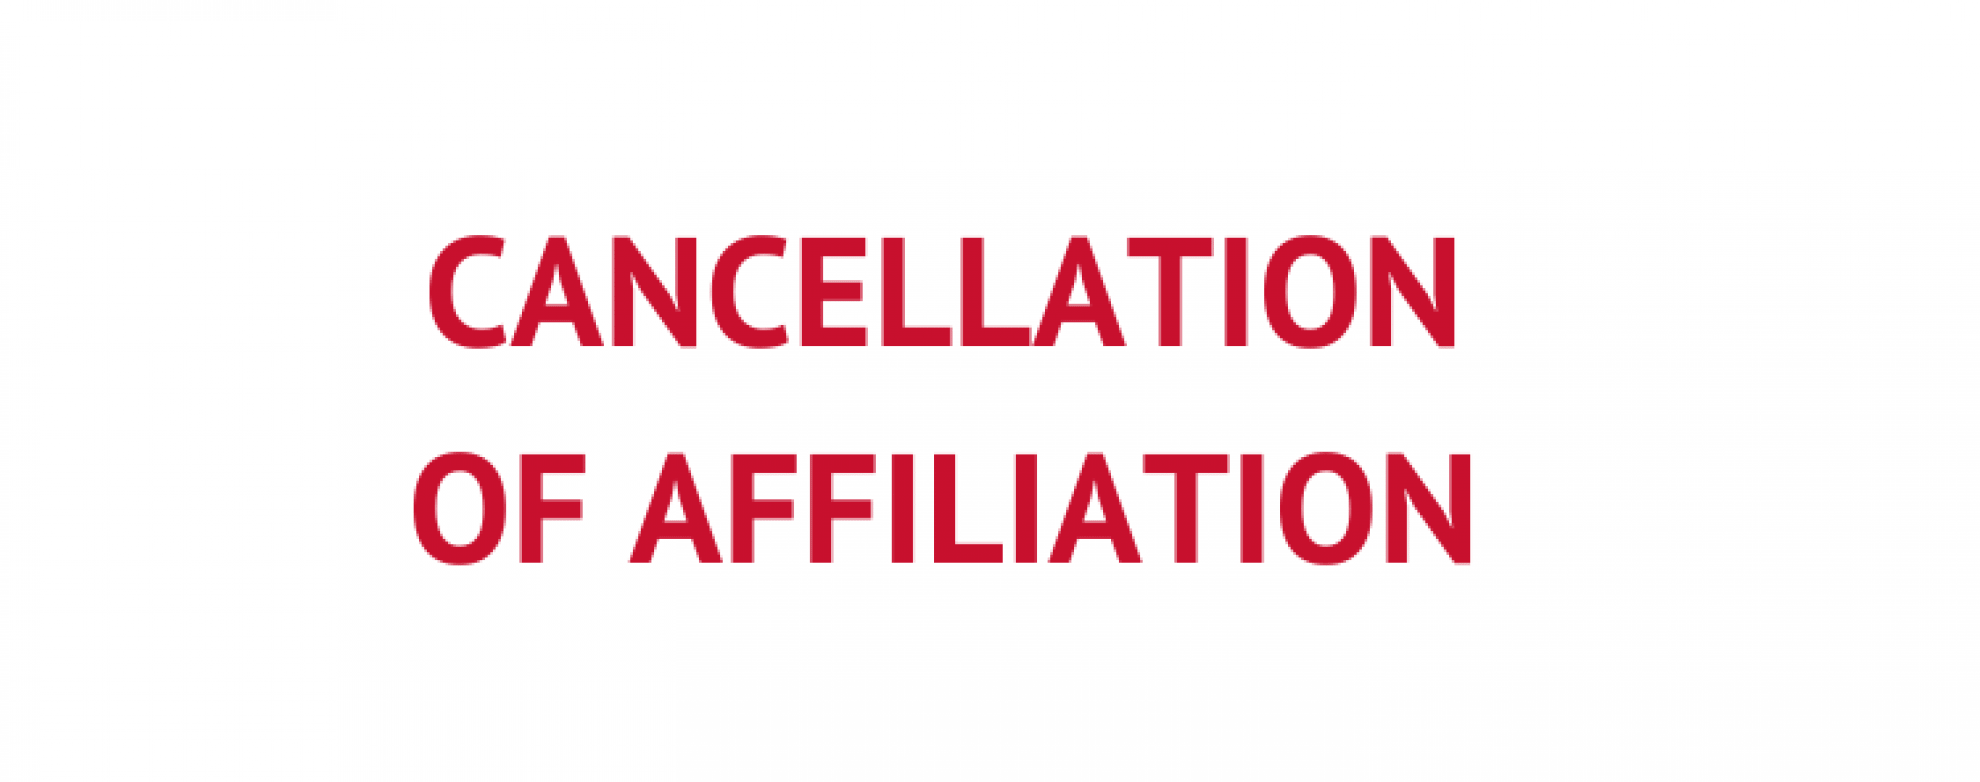 Cancellation of Affiliation